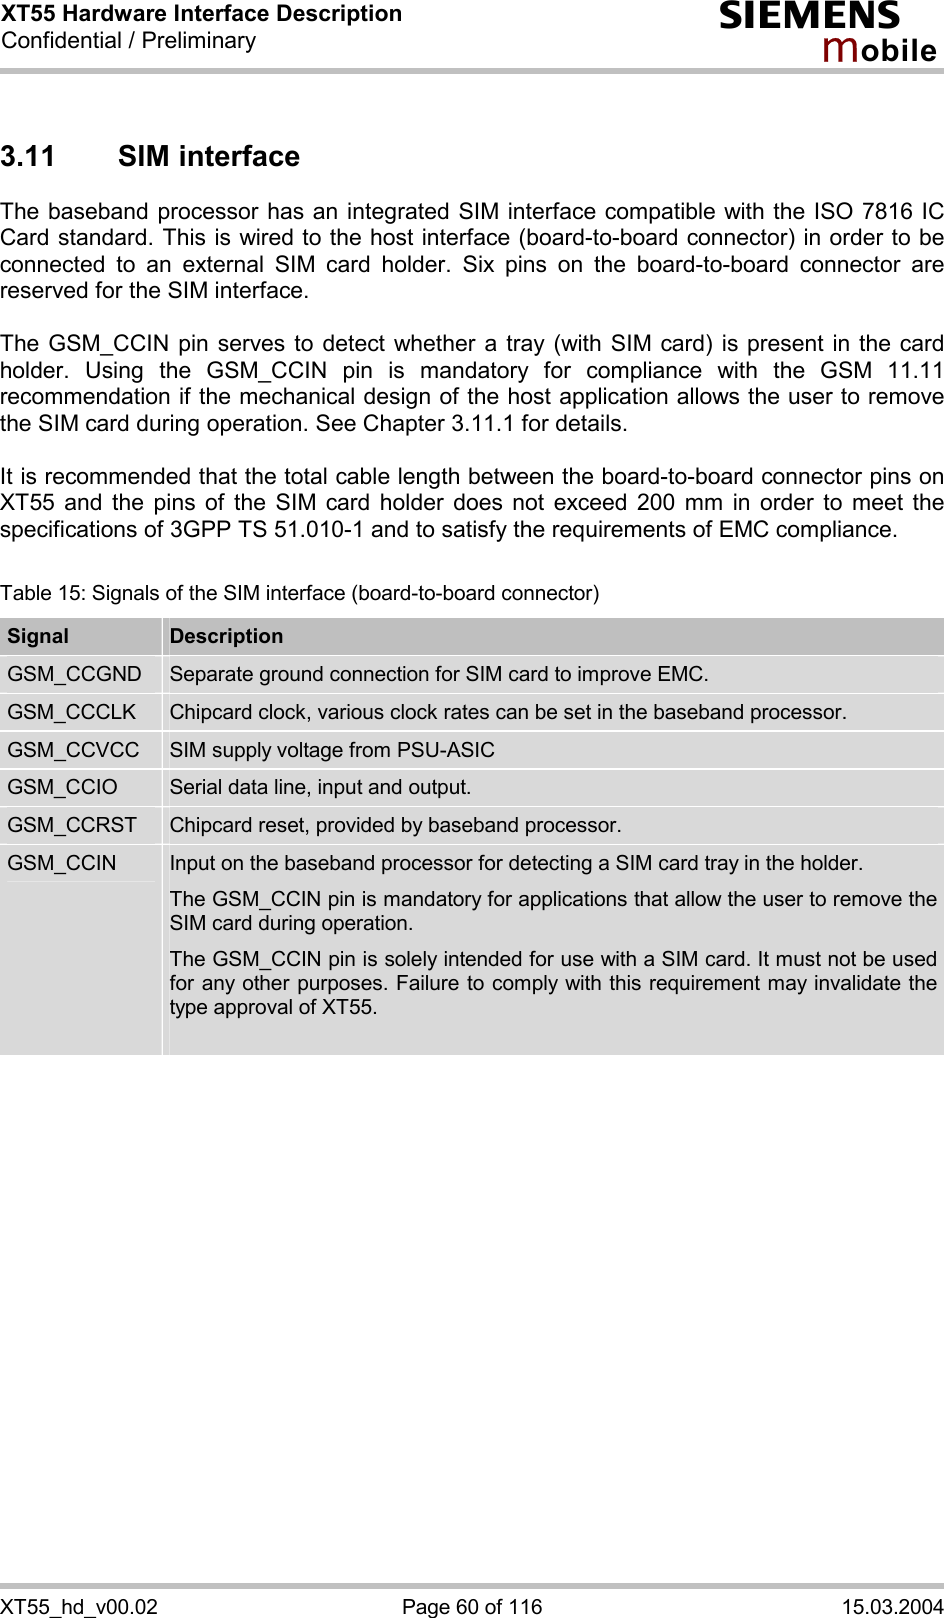 XT55 Hardware Interface Description Confidential / Preliminary s mo b i l e XT55_hd_v00.02  Page 60 of 116  15.03.2004 3.11 SIM interface The baseband processor has an integrated SIM interface compatible with the ISO 7816 IC Card standard. This is wired to the host interface (board-to-board connector) in order to be connected to an external SIM card holder. Six pins on the board-to-board connector are reserved for the SIM interface.   The GSM_CCIN pin serves to detect whether a tray (with SIM card) is present in the card holder. Using the GSM_CCIN pin is mandatory for compliance with the GSM 11.11 recommendation if the mechanical design of the host application allows the user to remove the SIM card during operation. See Chapter 3.11.1 for details.  It is recommended that the total cable length between the board-to-board connector pins on XT55 and the pins of the SIM card holder does not exceed 200 mm in order to meet the specifications of 3GPP TS 51.010-1 and to satisfy the requirements of EMC compliance.  Table 15: Signals of the SIM interface (board-to-board connector) Signal  Description GSM_CCGND  Separate ground connection for SIM card to improve EMC. GSM_CCCLK  Chipcard clock, various clock rates can be set in the baseband processor. GSM_CCVCC  SIM supply voltage from PSU-ASIC GSM_CCIO  Serial data line, input and output. GSM_CCRST  Chipcard reset, provided by baseband processor. GSM_CCIN  Input on the baseband processor for detecting a SIM card tray in the holder. The GSM_CCIN pin is mandatory for applications that allow the user to remove the SIM card during operation.  The GSM_CCIN pin is solely intended for use with a SIM card. It must not be used for any other purposes. Failure to comply with this requirement may invalidate the type approval of XT55.   